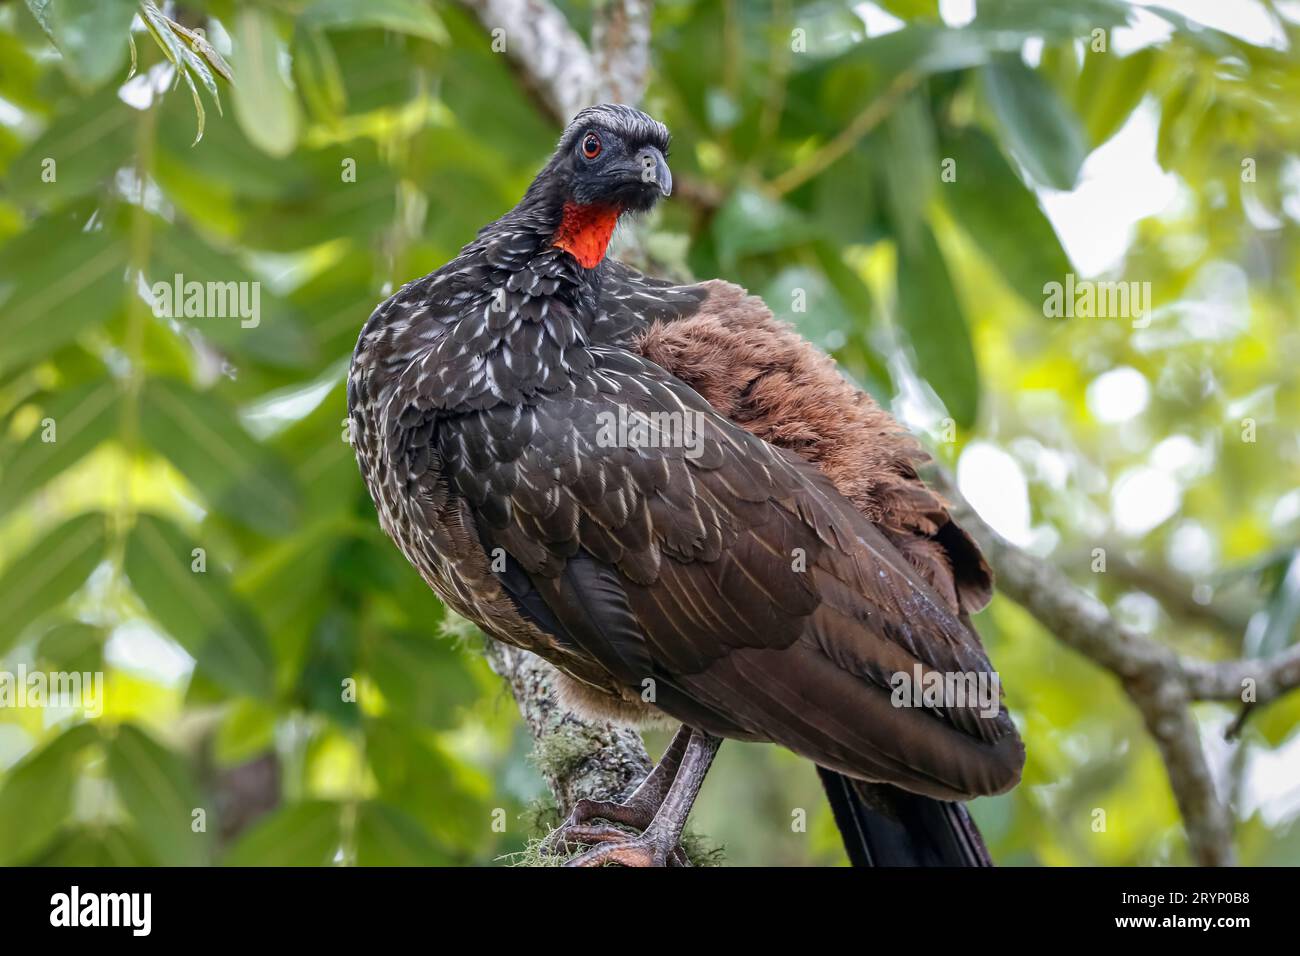 Close-up of a Dusky-legged xperched on a tree branch with leafy background, Serra da Mantiqueira, Atlantic Forest, Itatiaia, Bra Stock Photo